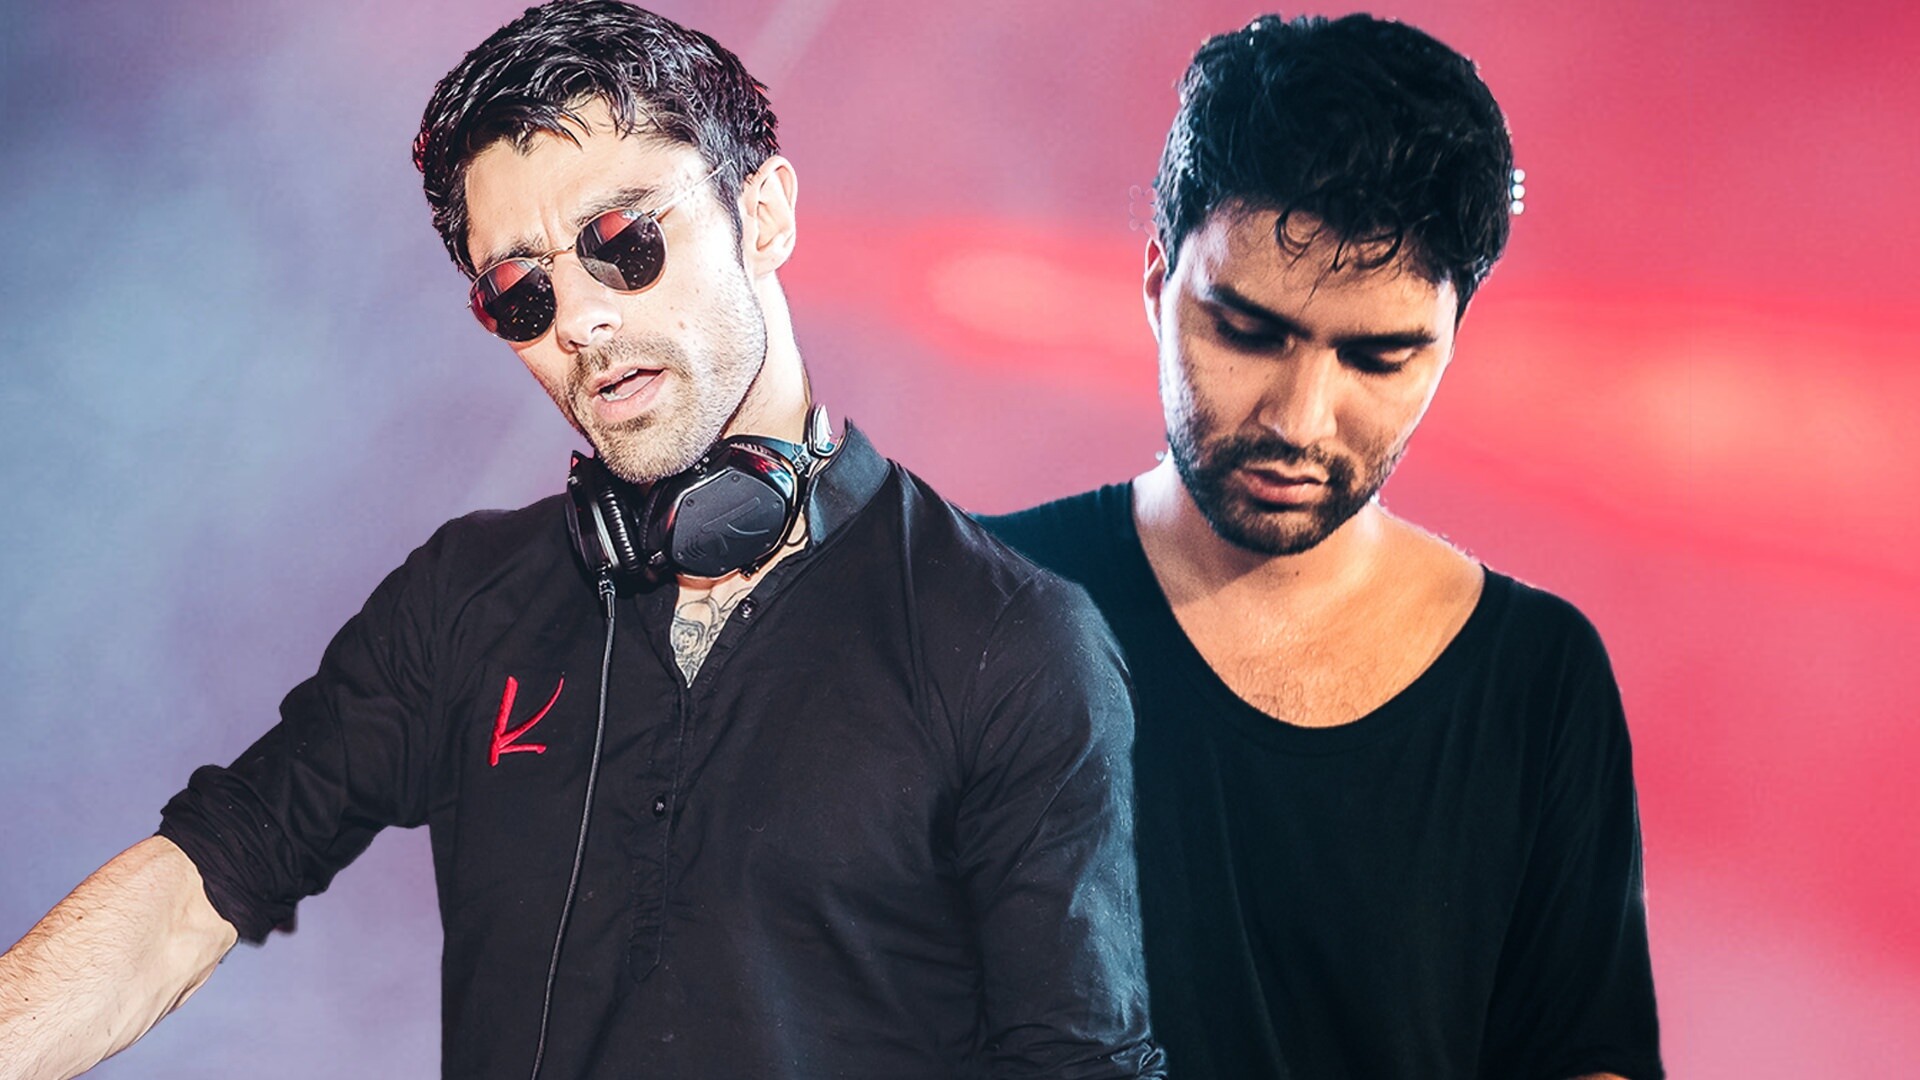 KSHMR: A collaboration with R3hab resulted in the single "Karate" that charted in SNEP in March 2015. 1920x1080 Full HD Wallpaper.